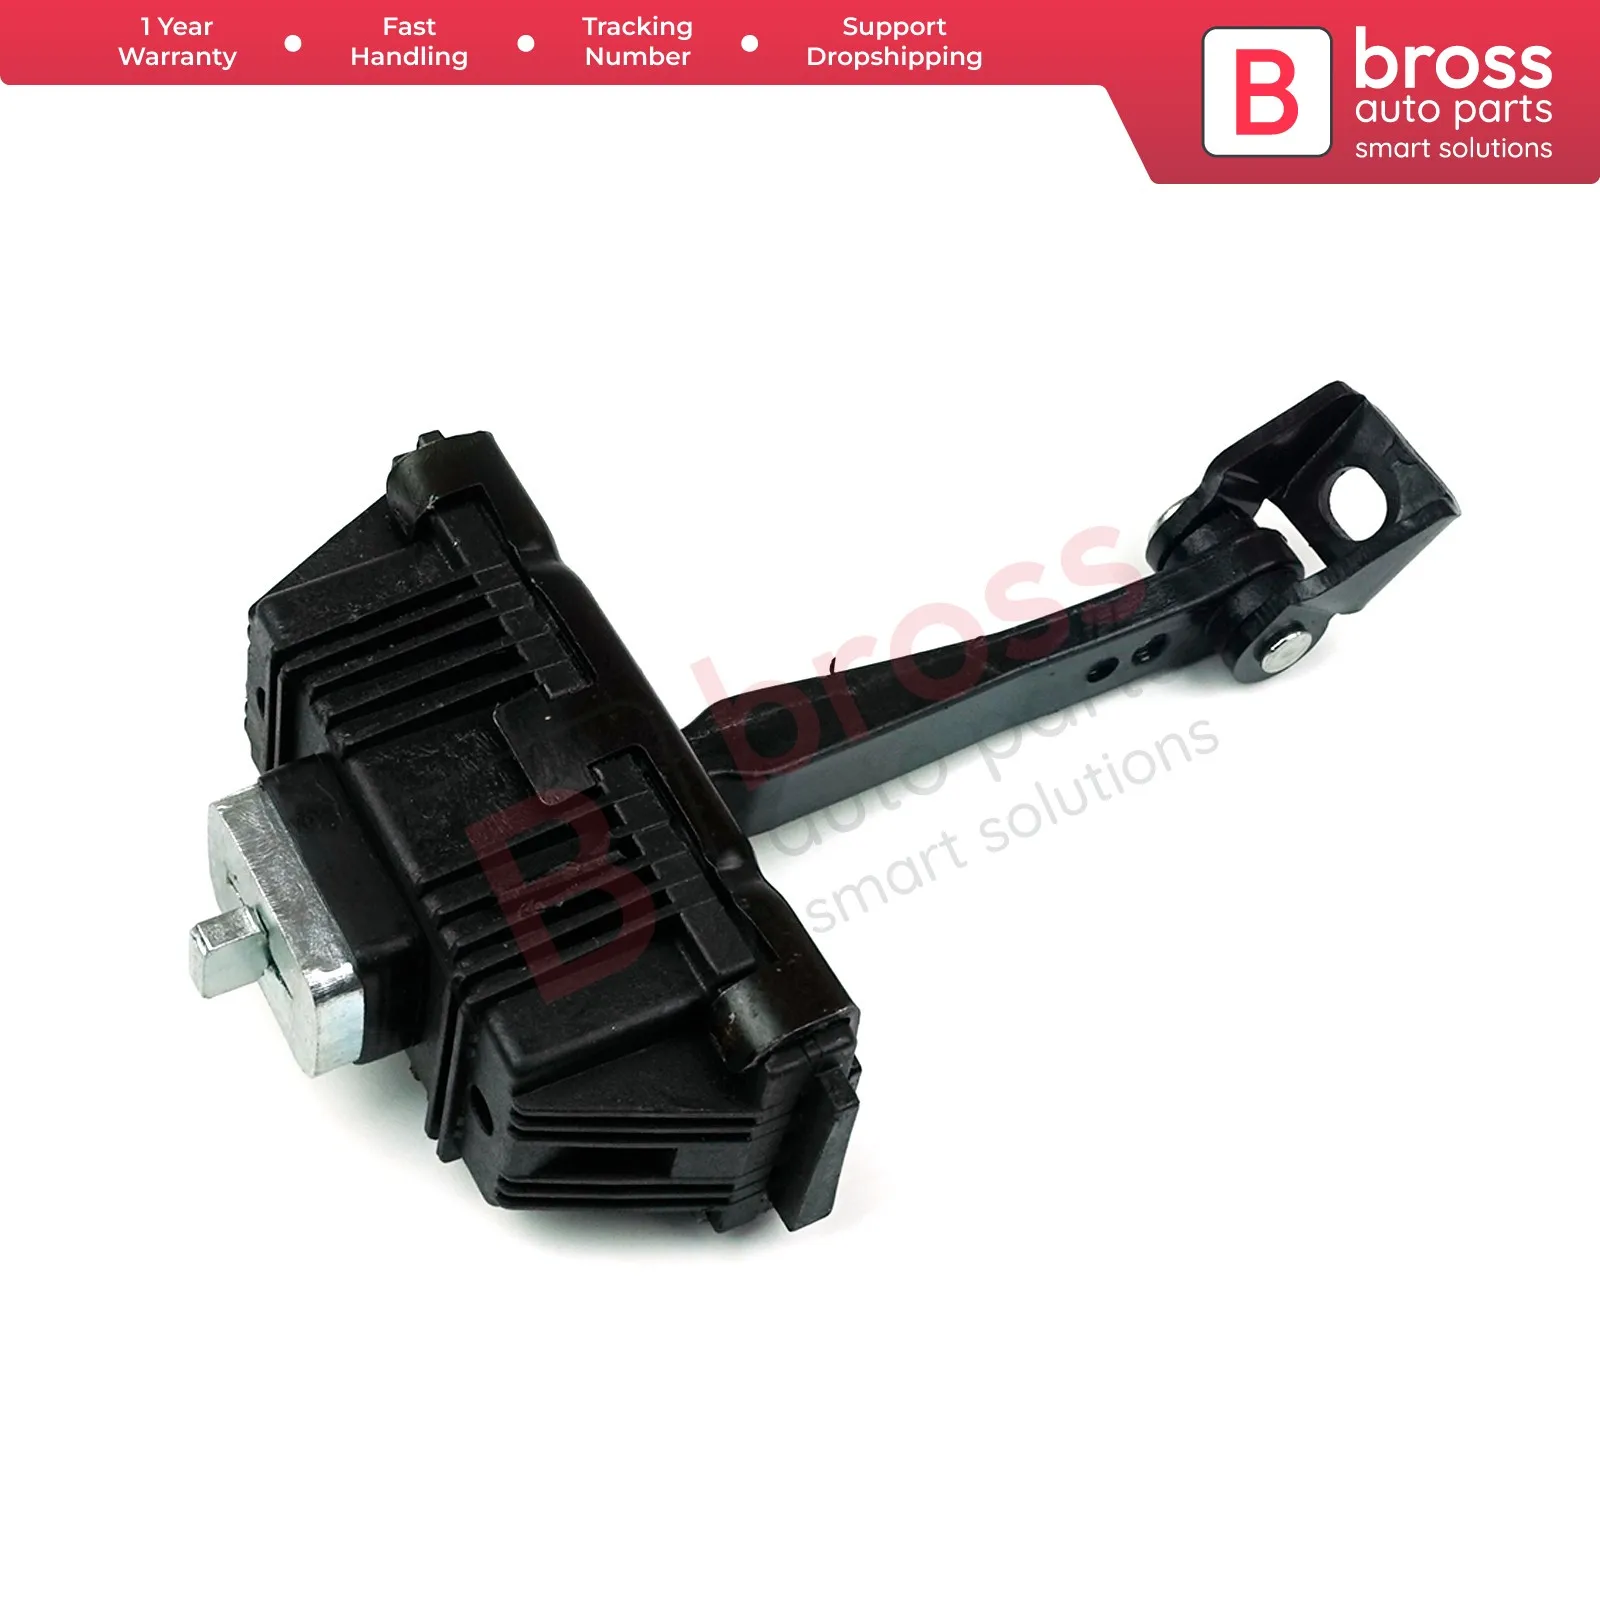 

BDP1076 Rear Door Hinge Brake Stop Check Strap Limiter Protection Lever Arm 5122840256 for BMW X5 E53 1999-2006 Made in Turkey